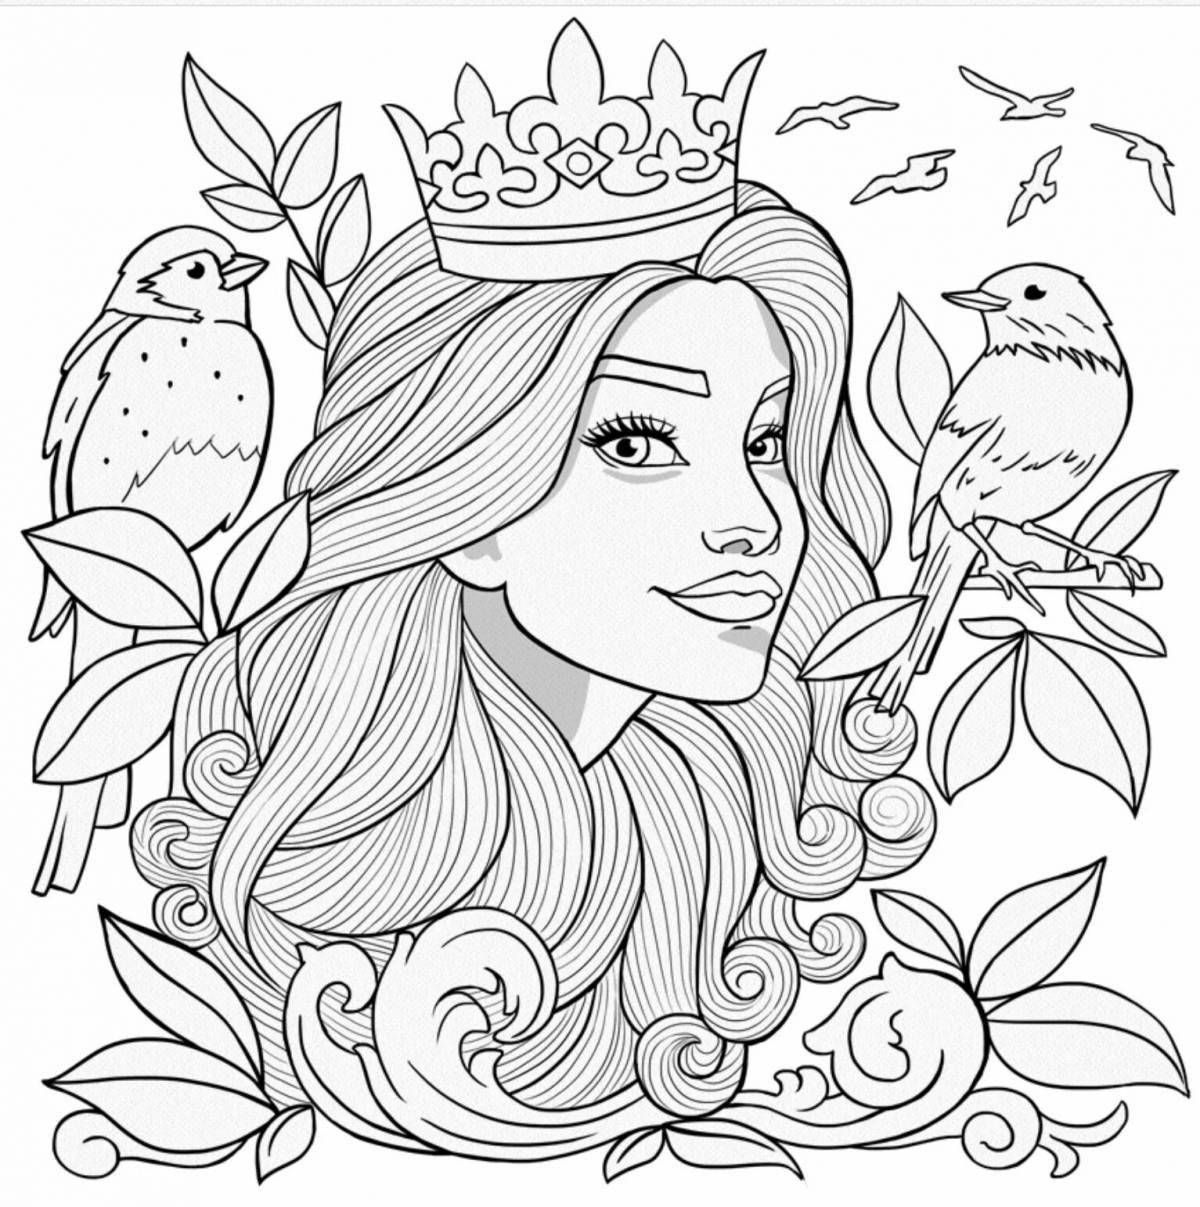 Exquisite coloring book for 12 year old girls